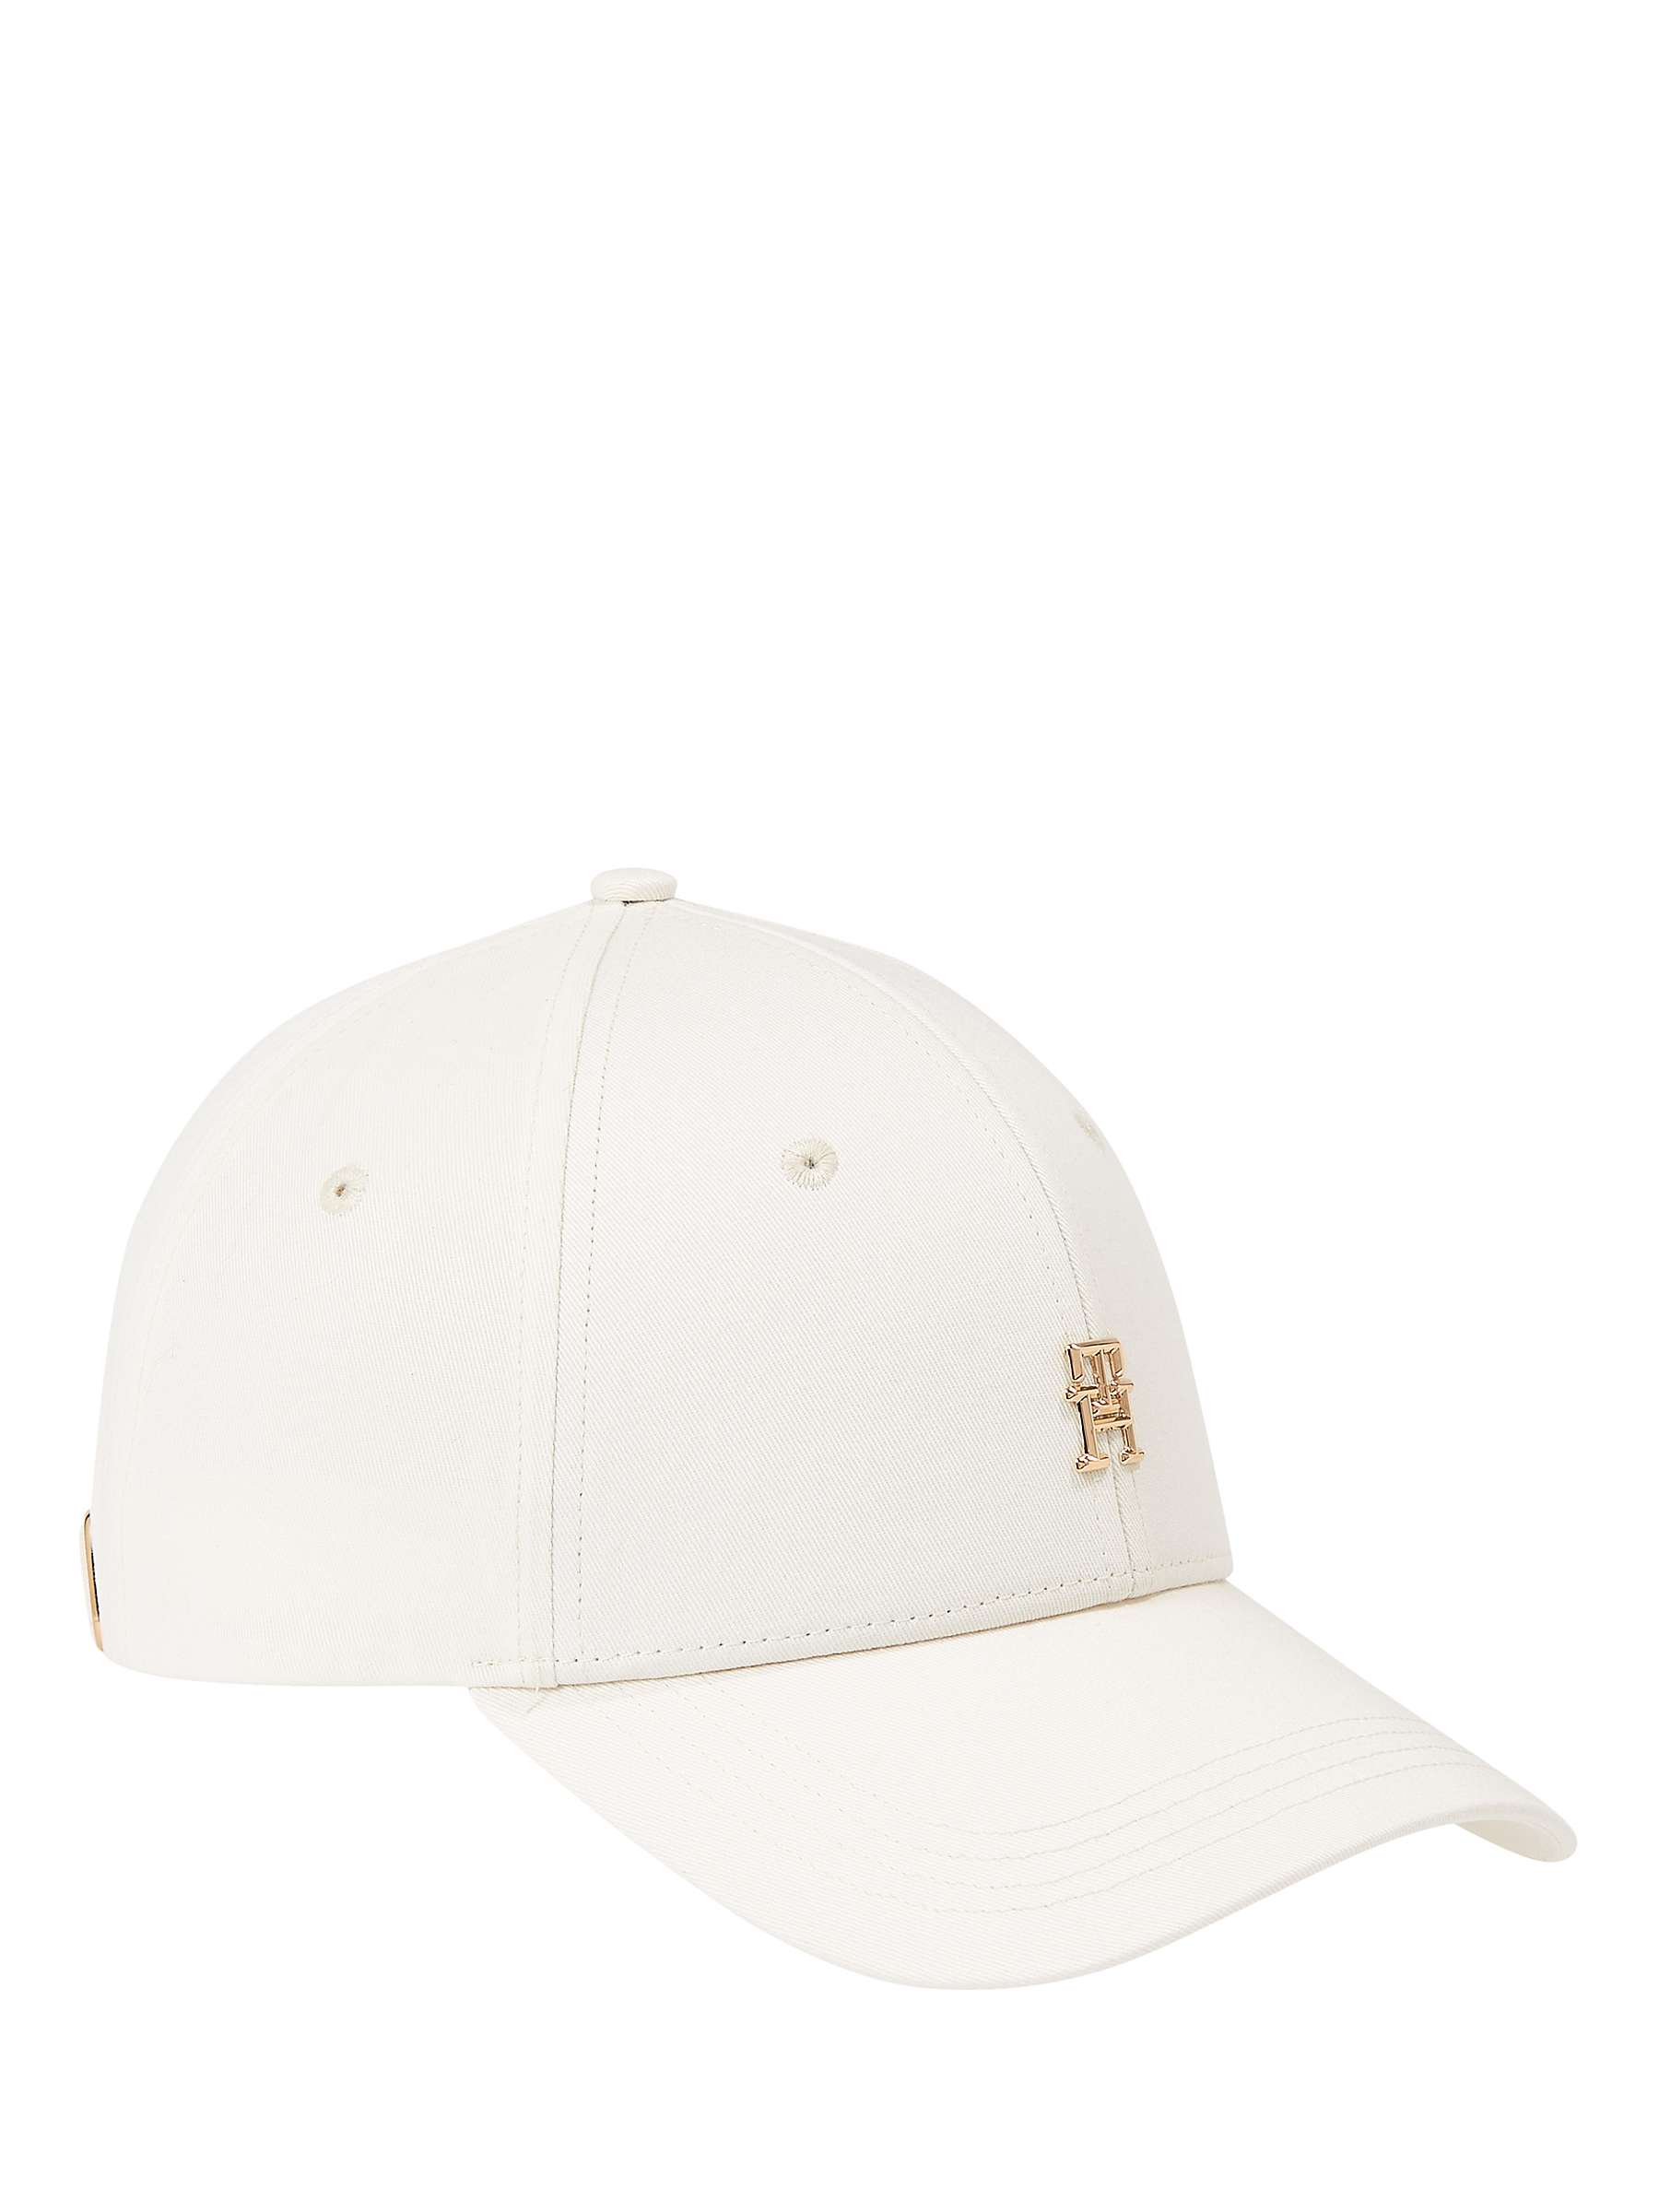 Buy Tommy Hilfiger Essential Chic Cap, Calico Online at johnlewis.com